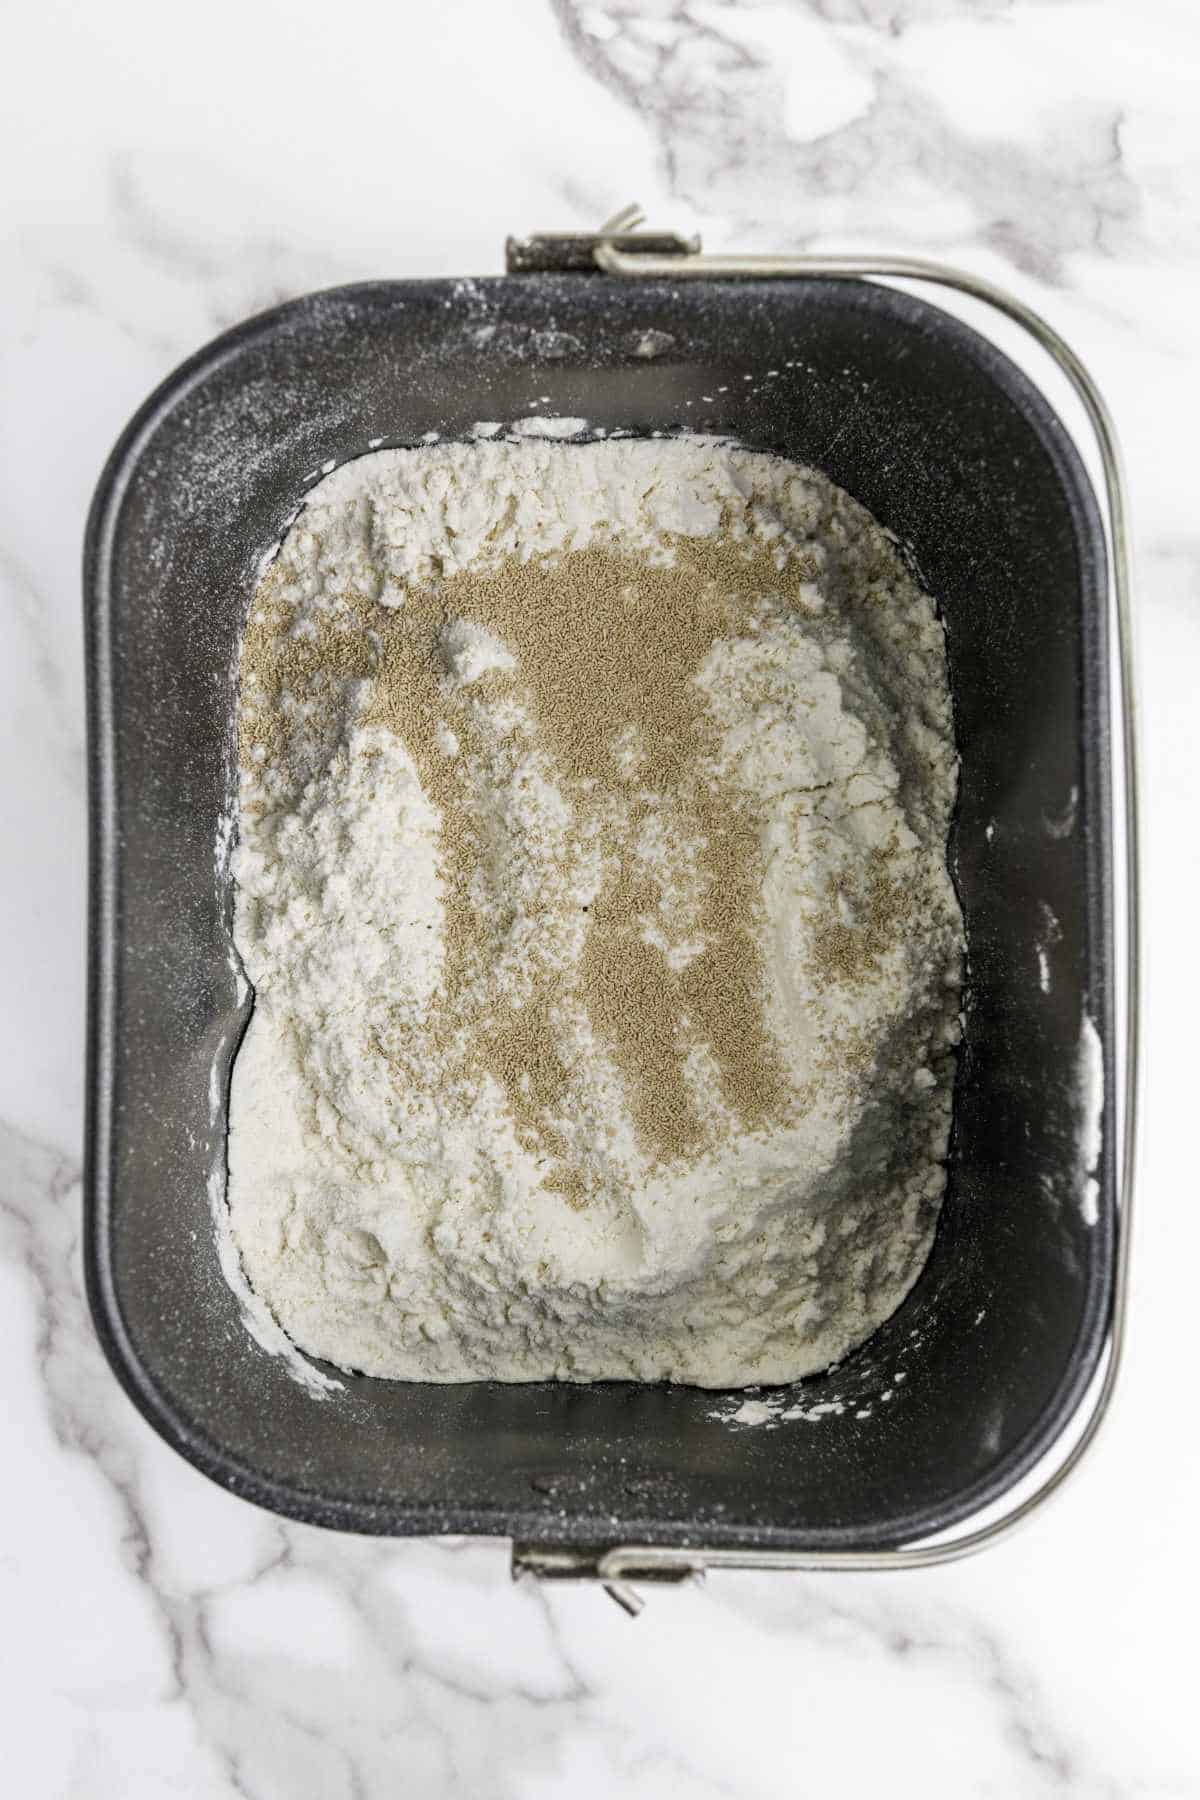 flour and yeast added to a bread maker pan.